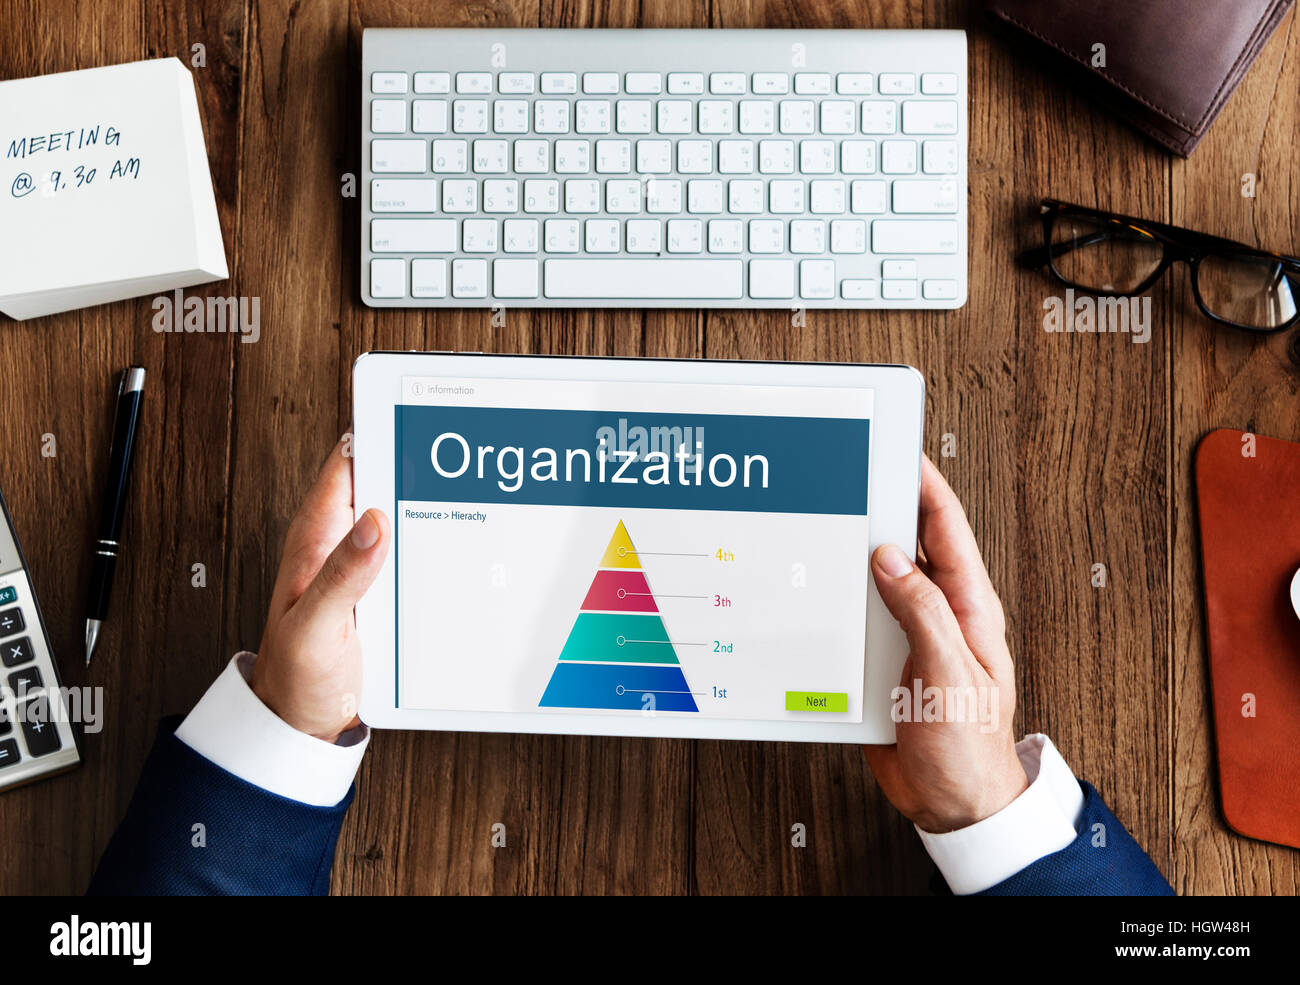 Hierarchy Organization Structure Position Chart Concept Stock Photo